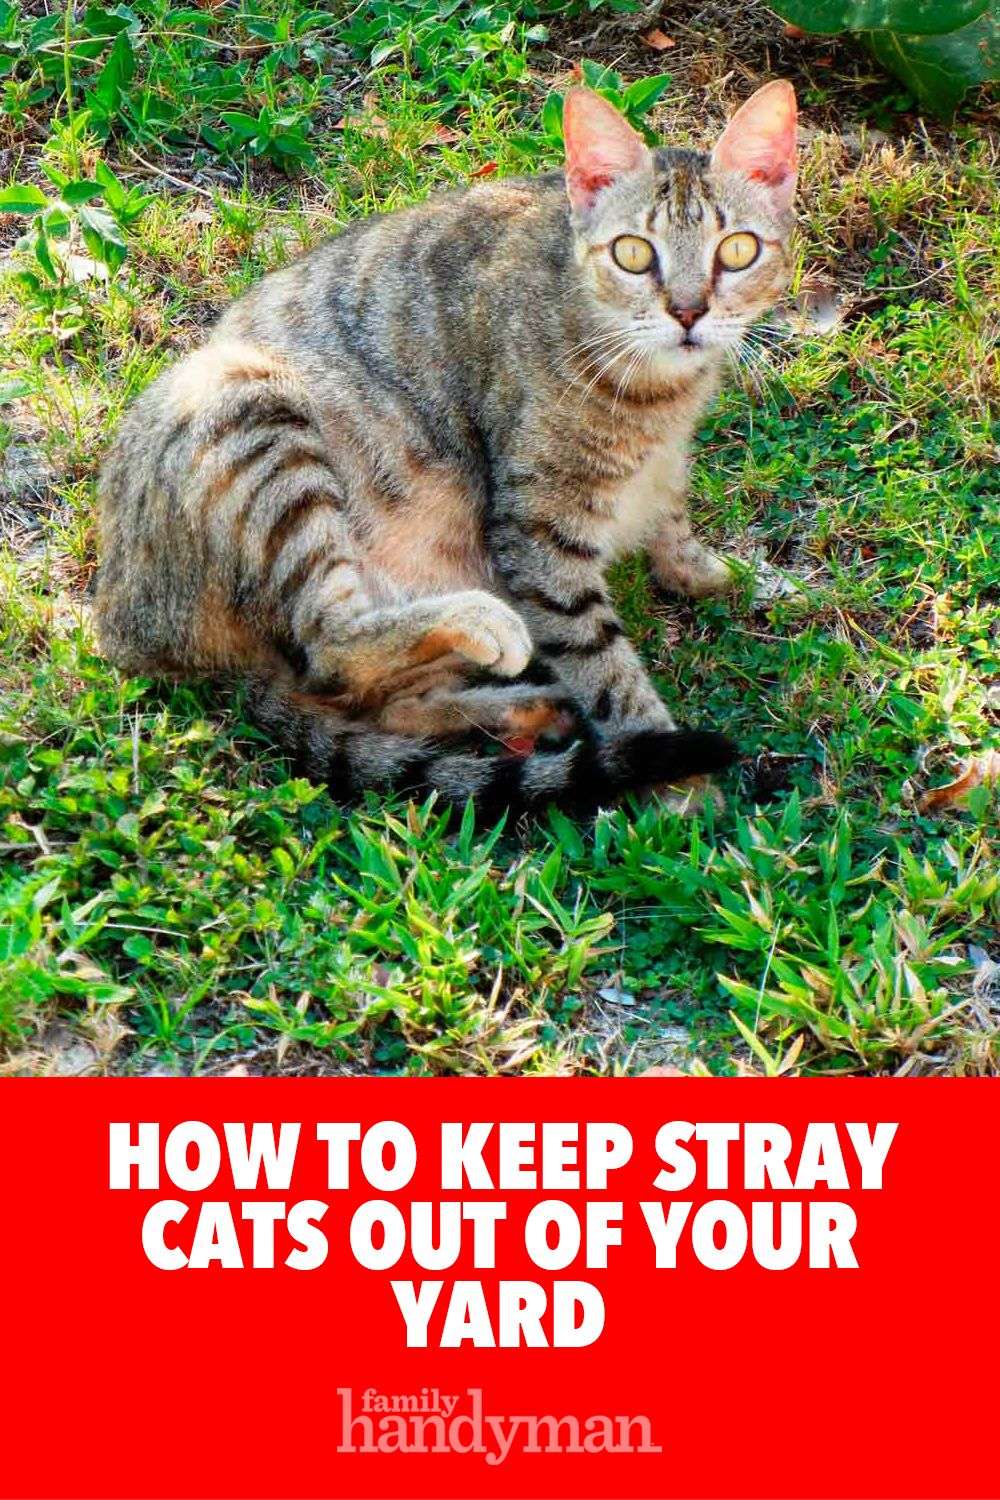 How to Keep Cats Out of Your Yard